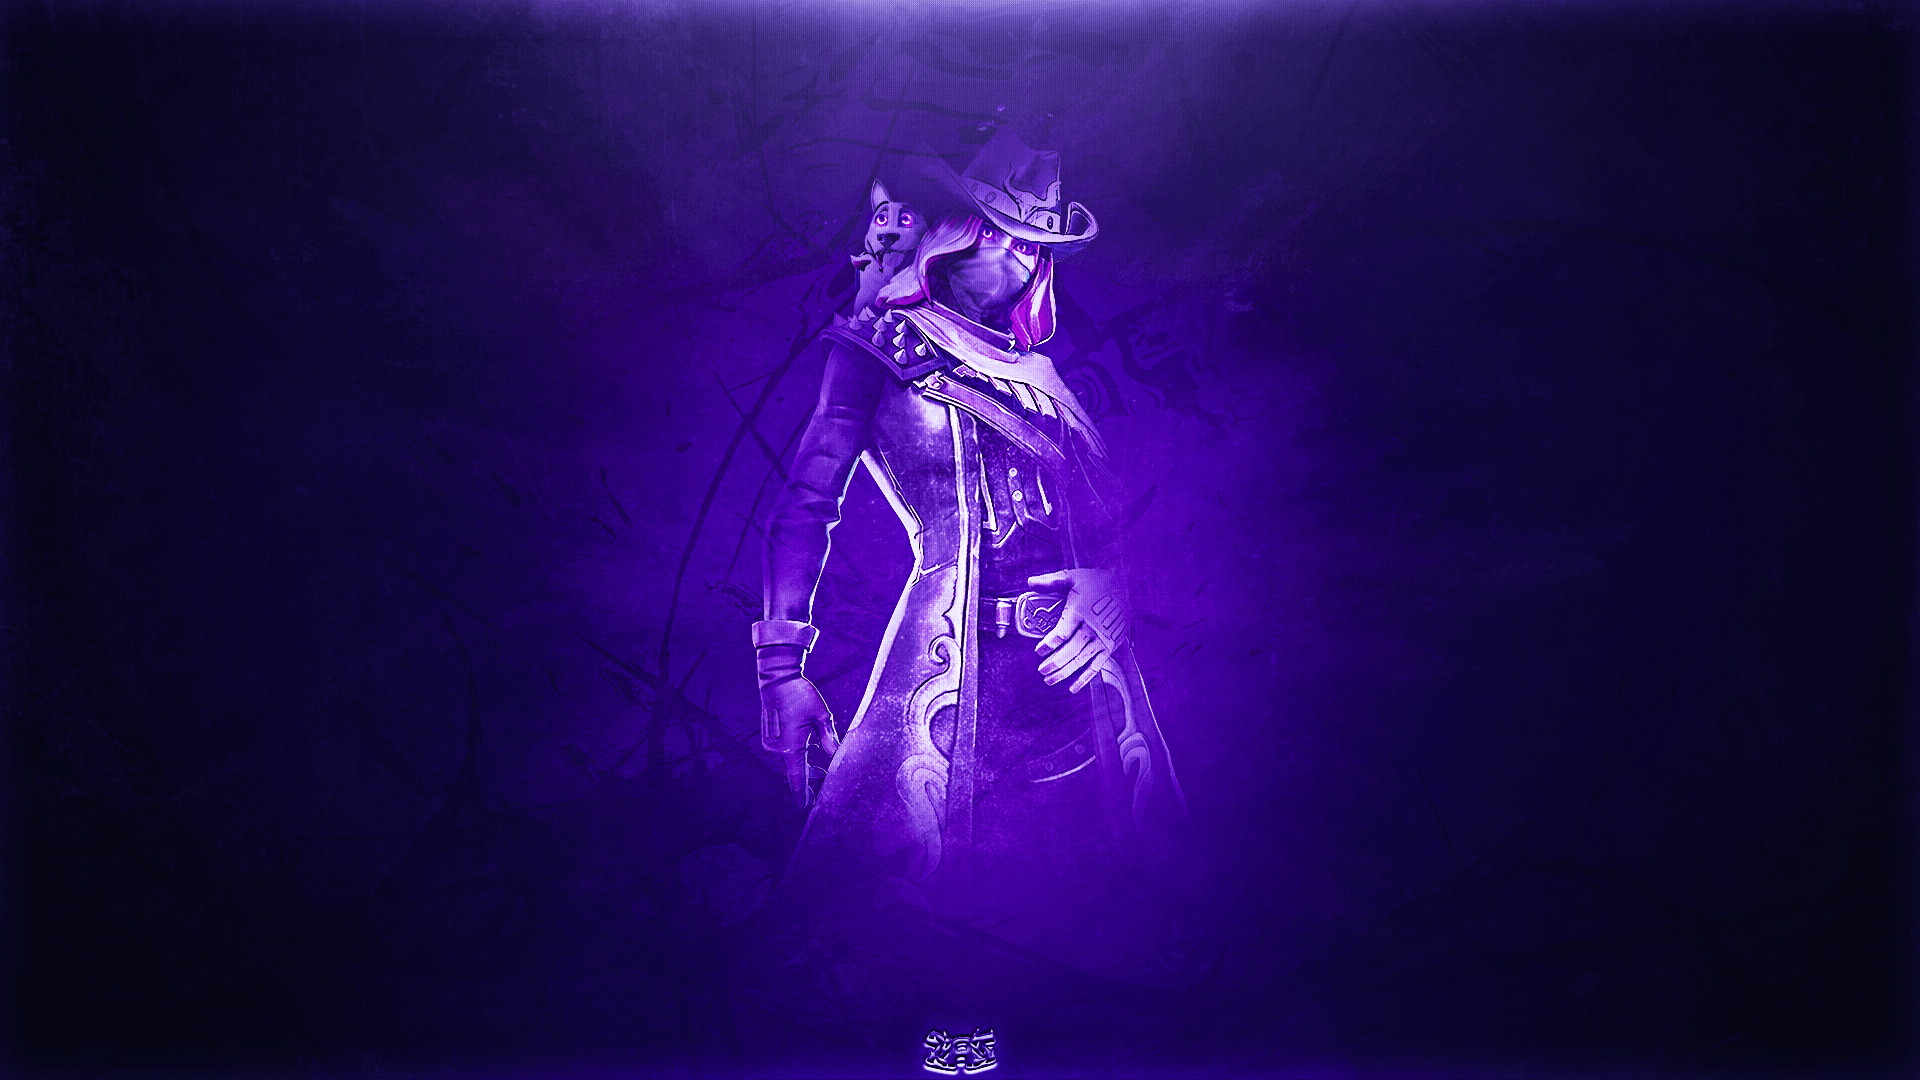 Fortnite Calamity Wallpapers By: Zas.